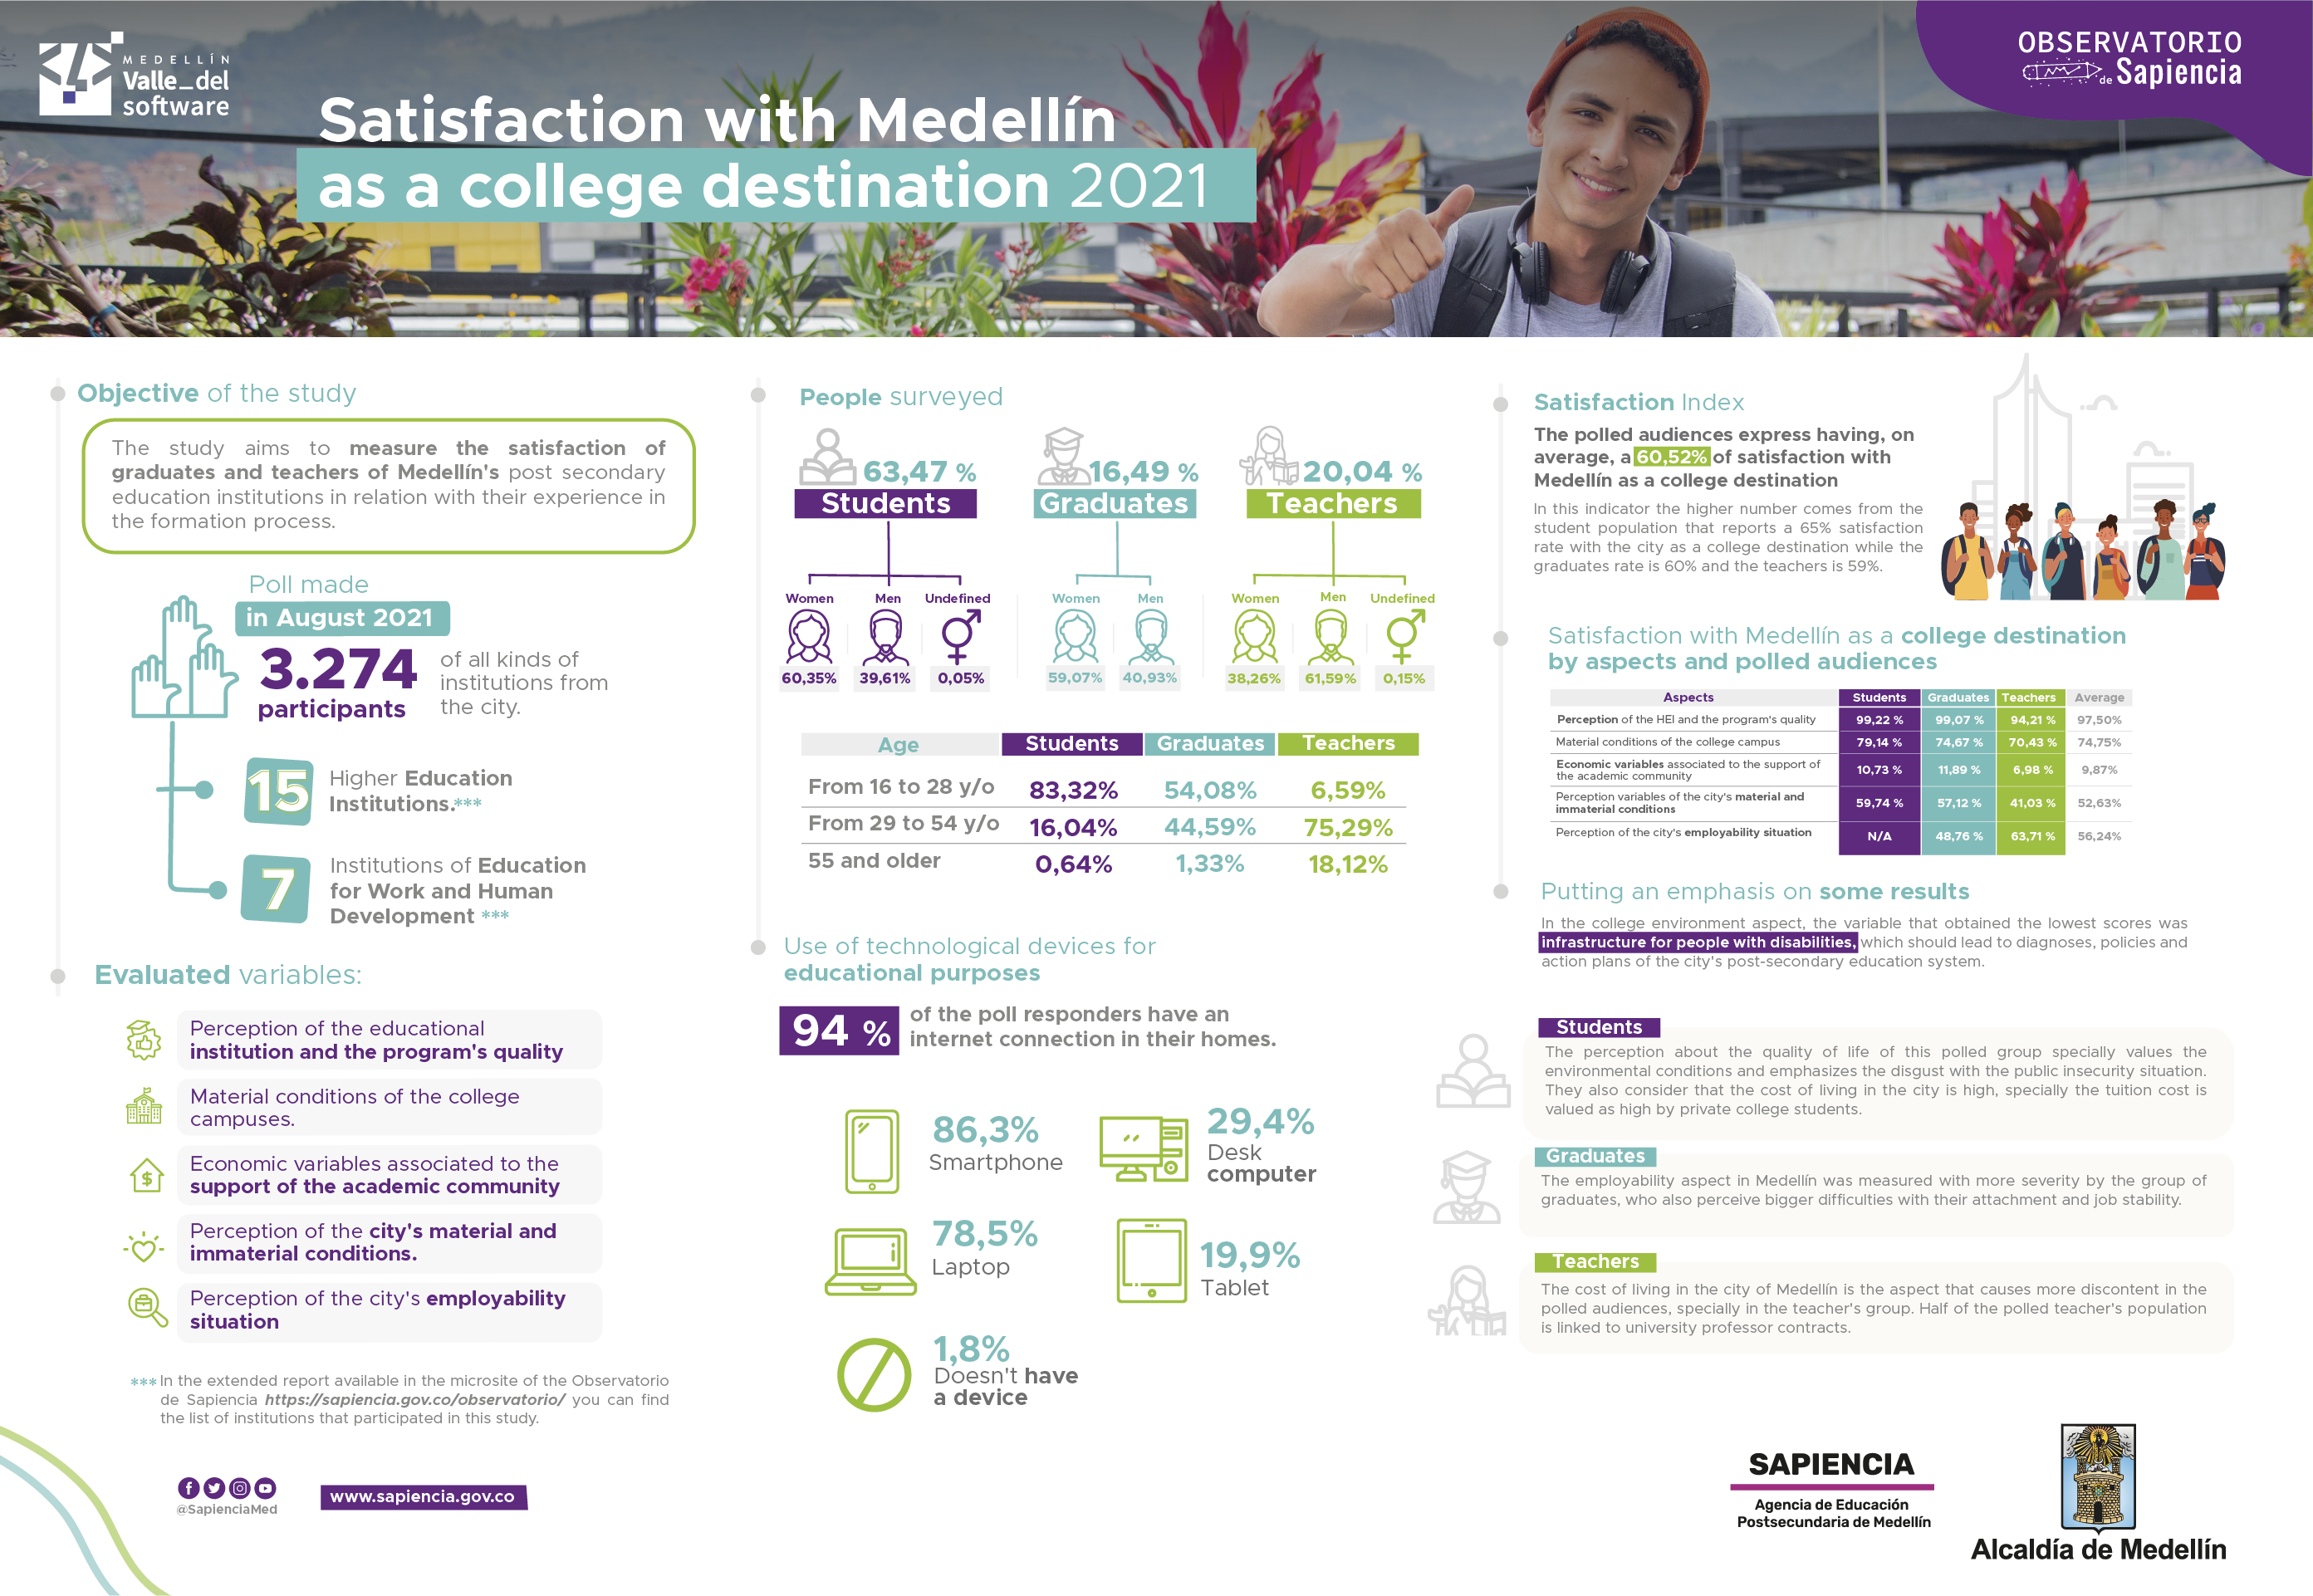 Image satisfaction with medellin as a college destination